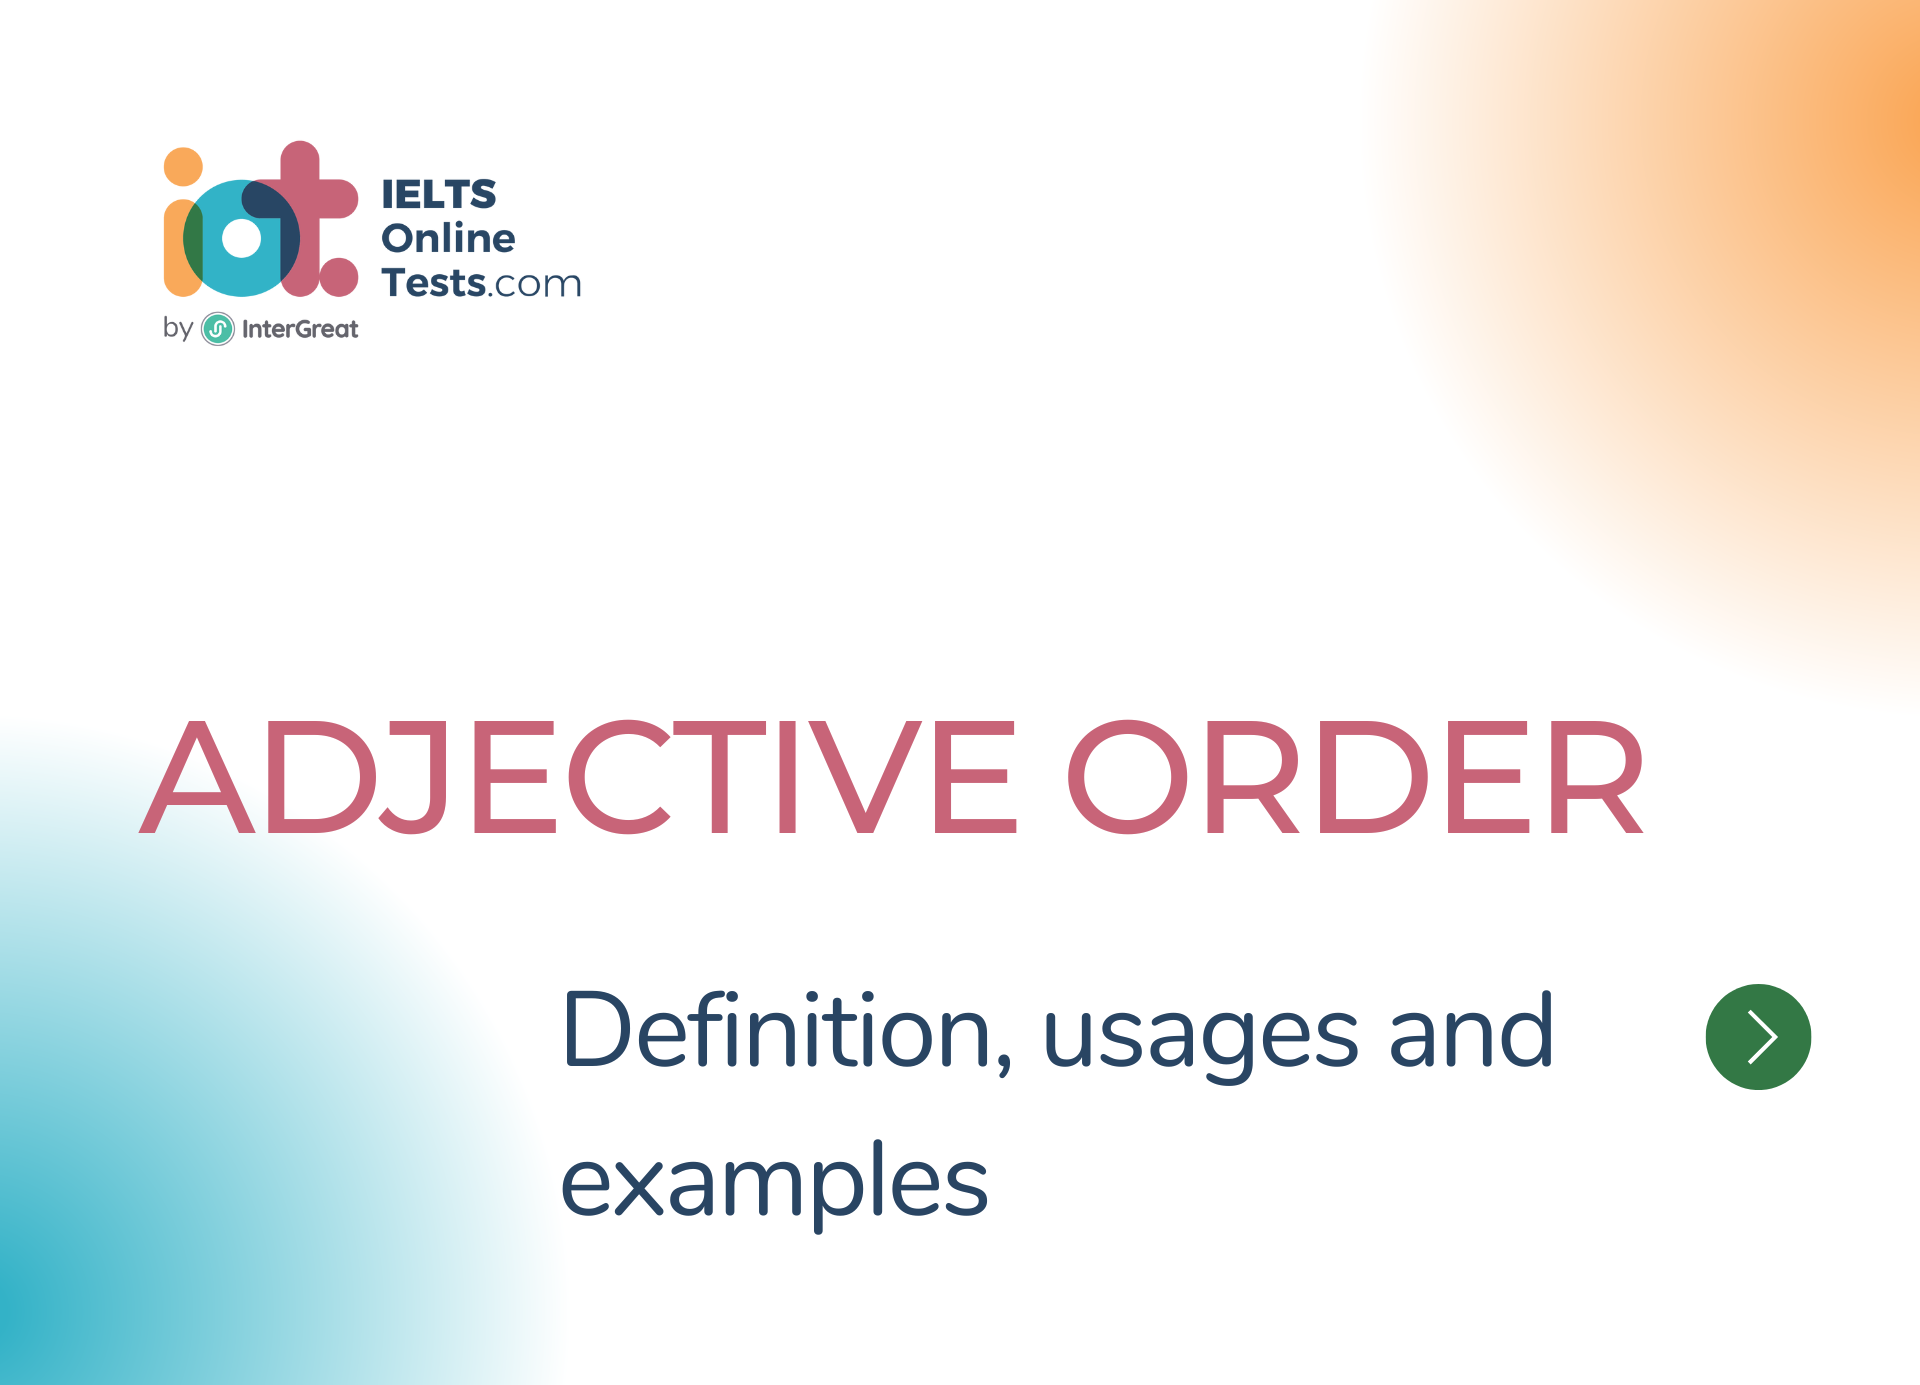 Adjective Order guidelines and examples